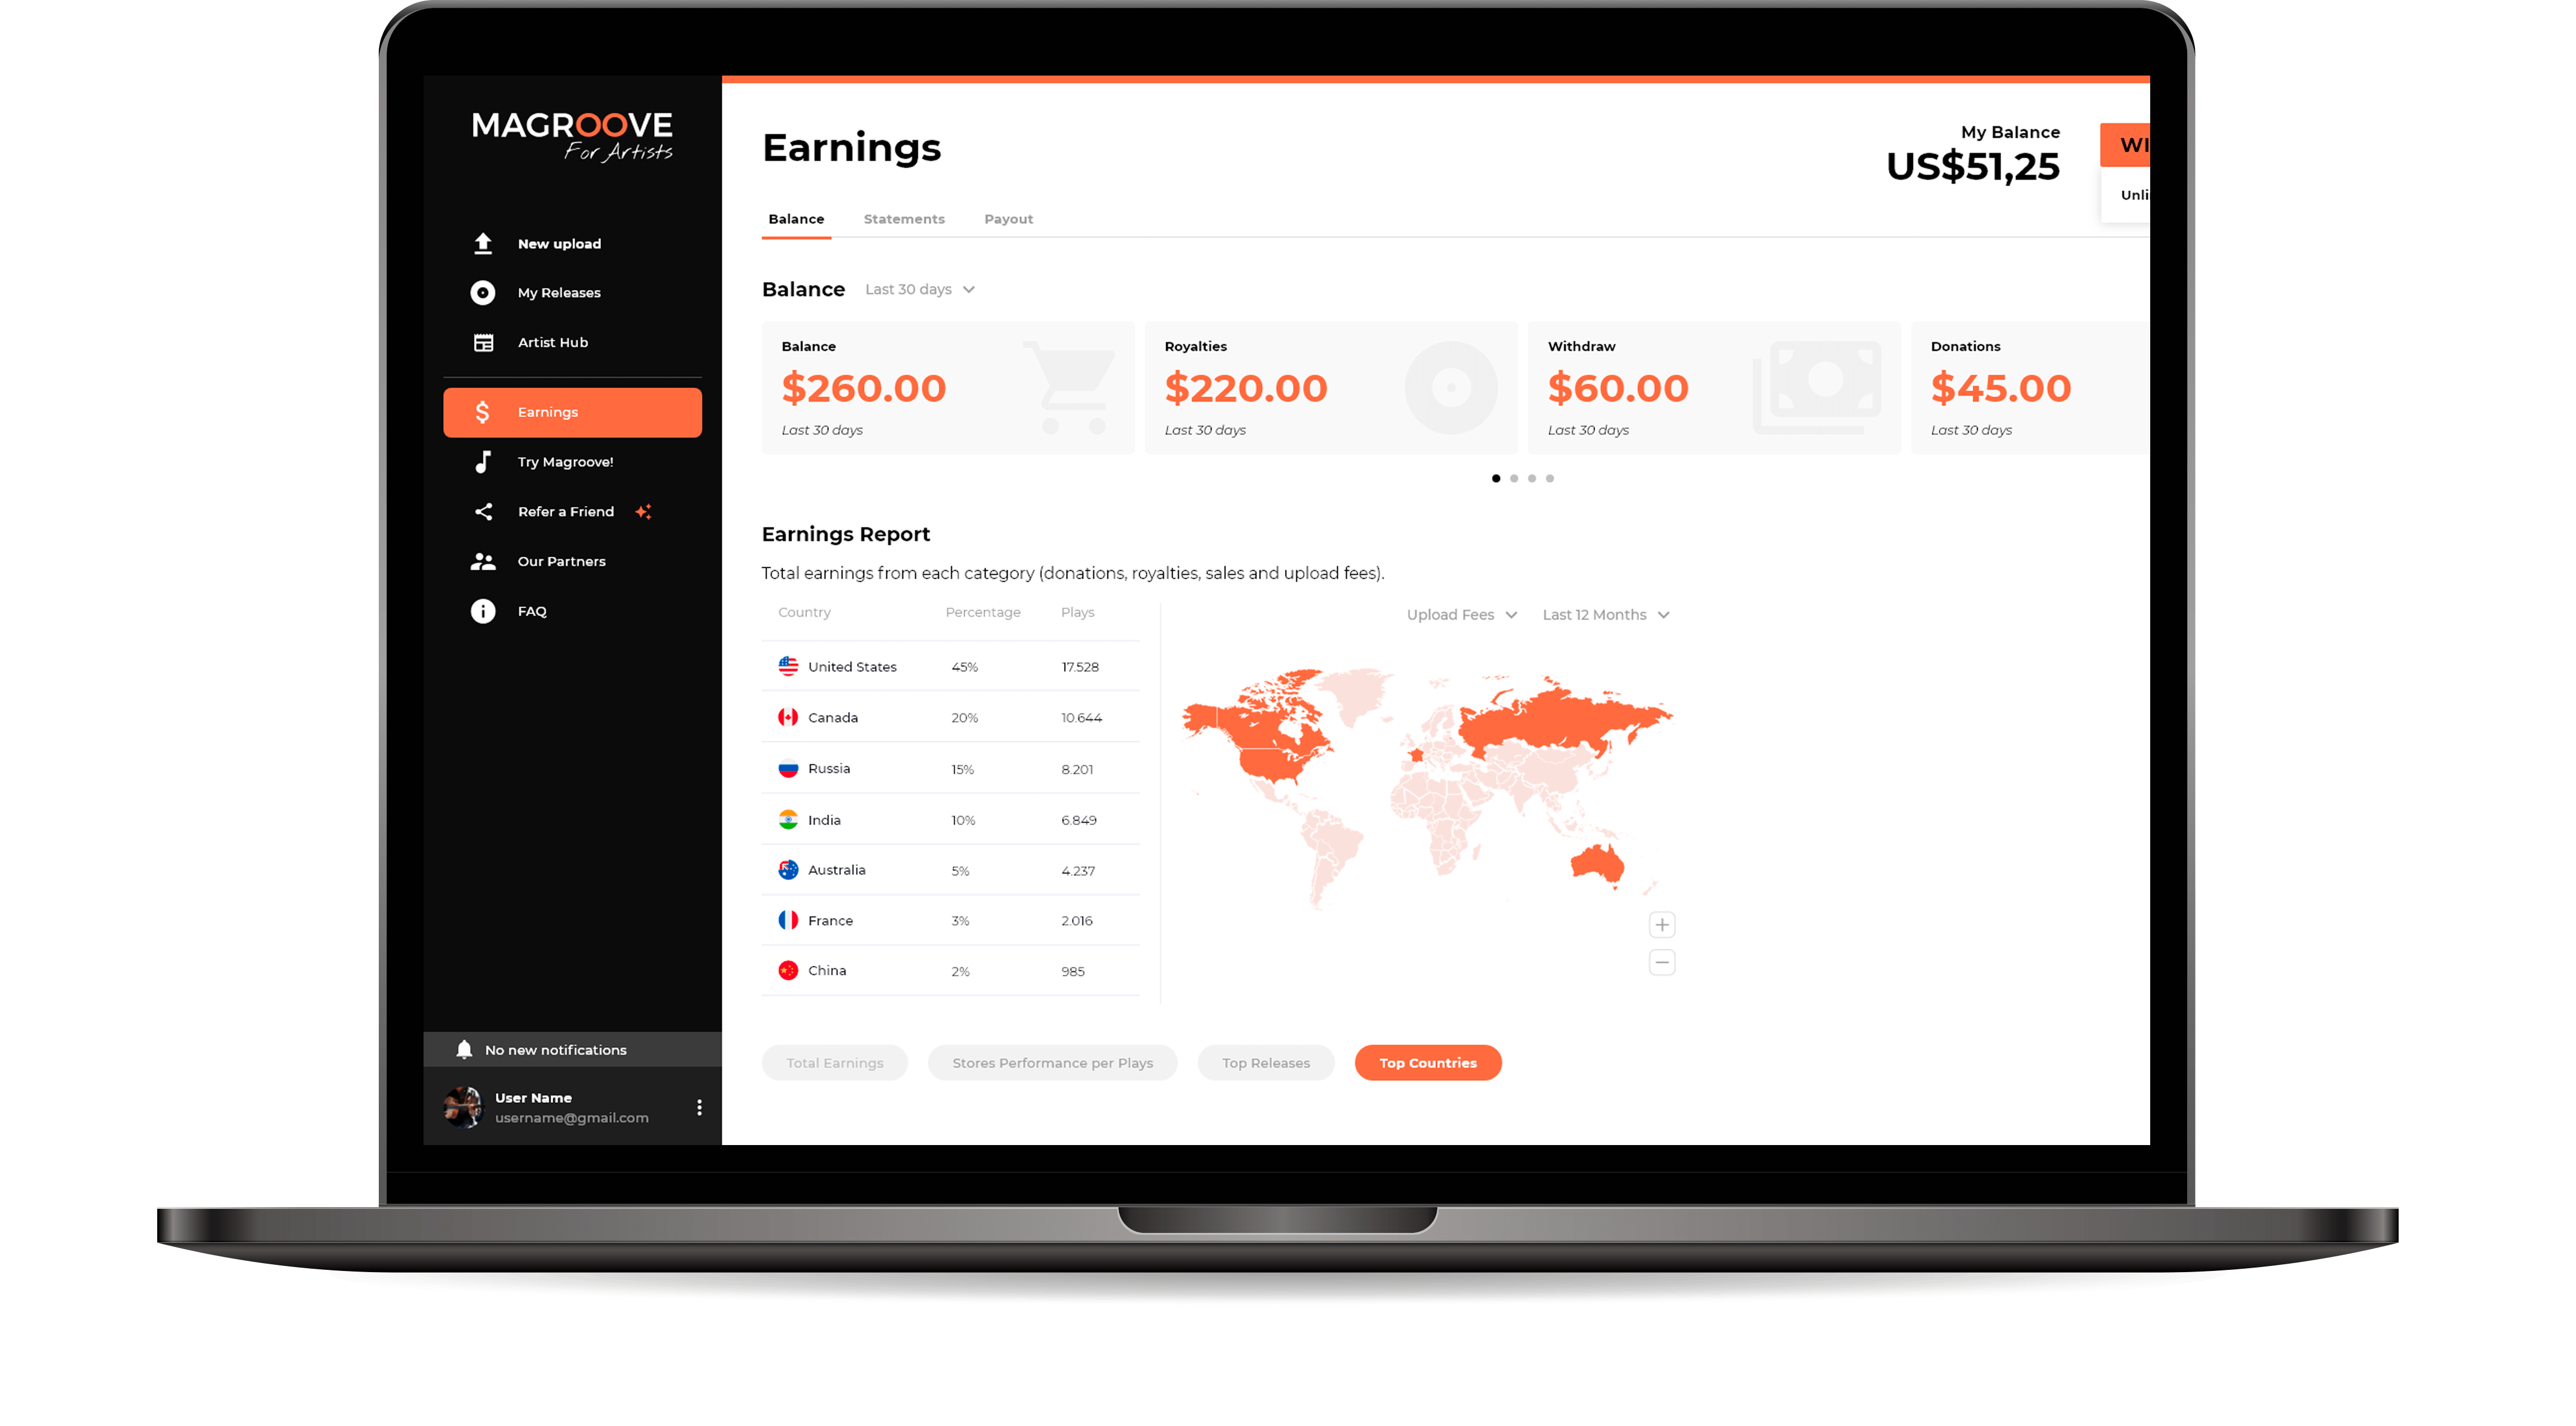 Notebook with Magroove's Earnings Page displayed at screen. Page shows several monetary figures such as balance, royalties and withdrawals, and a graphic report of earnings per country.